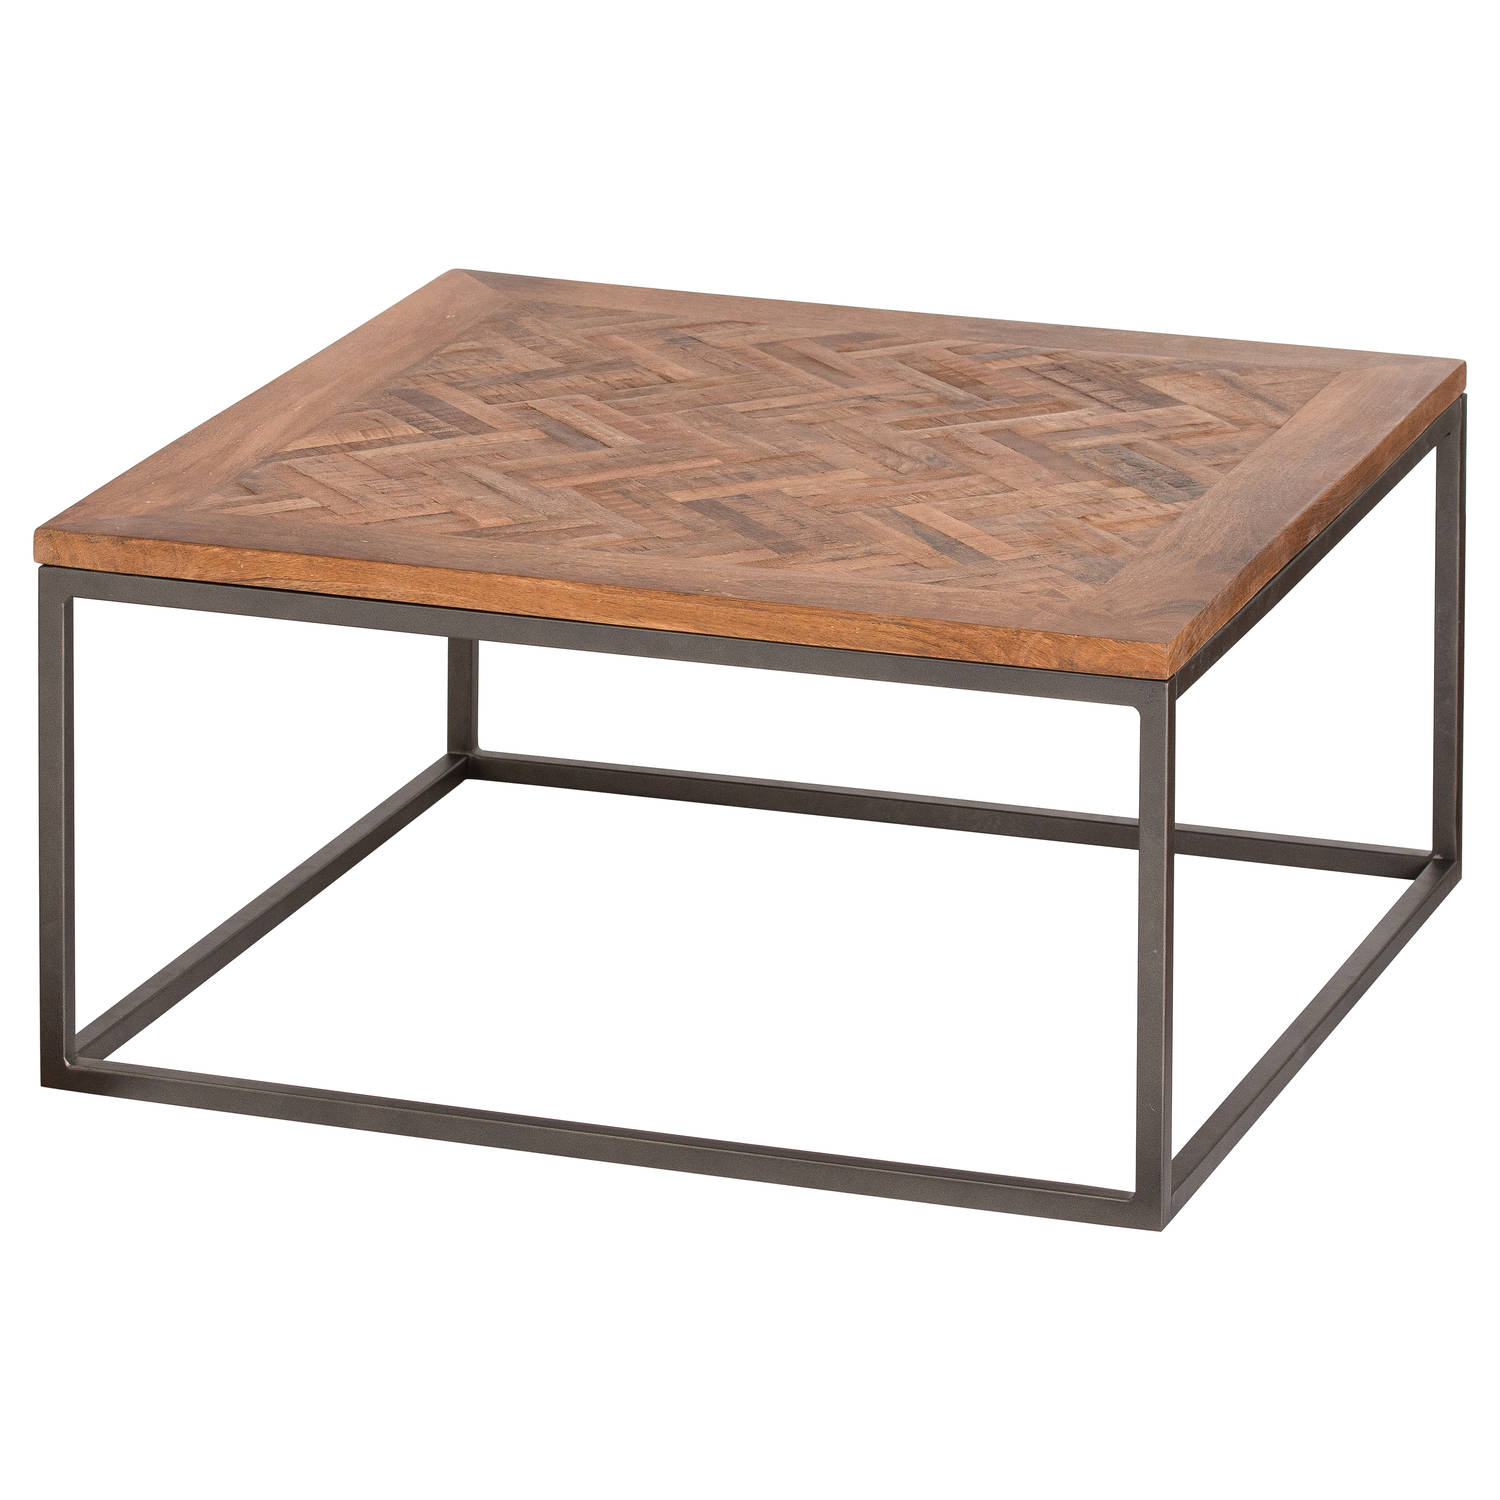 Hoxton Collection Coffee Table With Parquet Top - Image 1